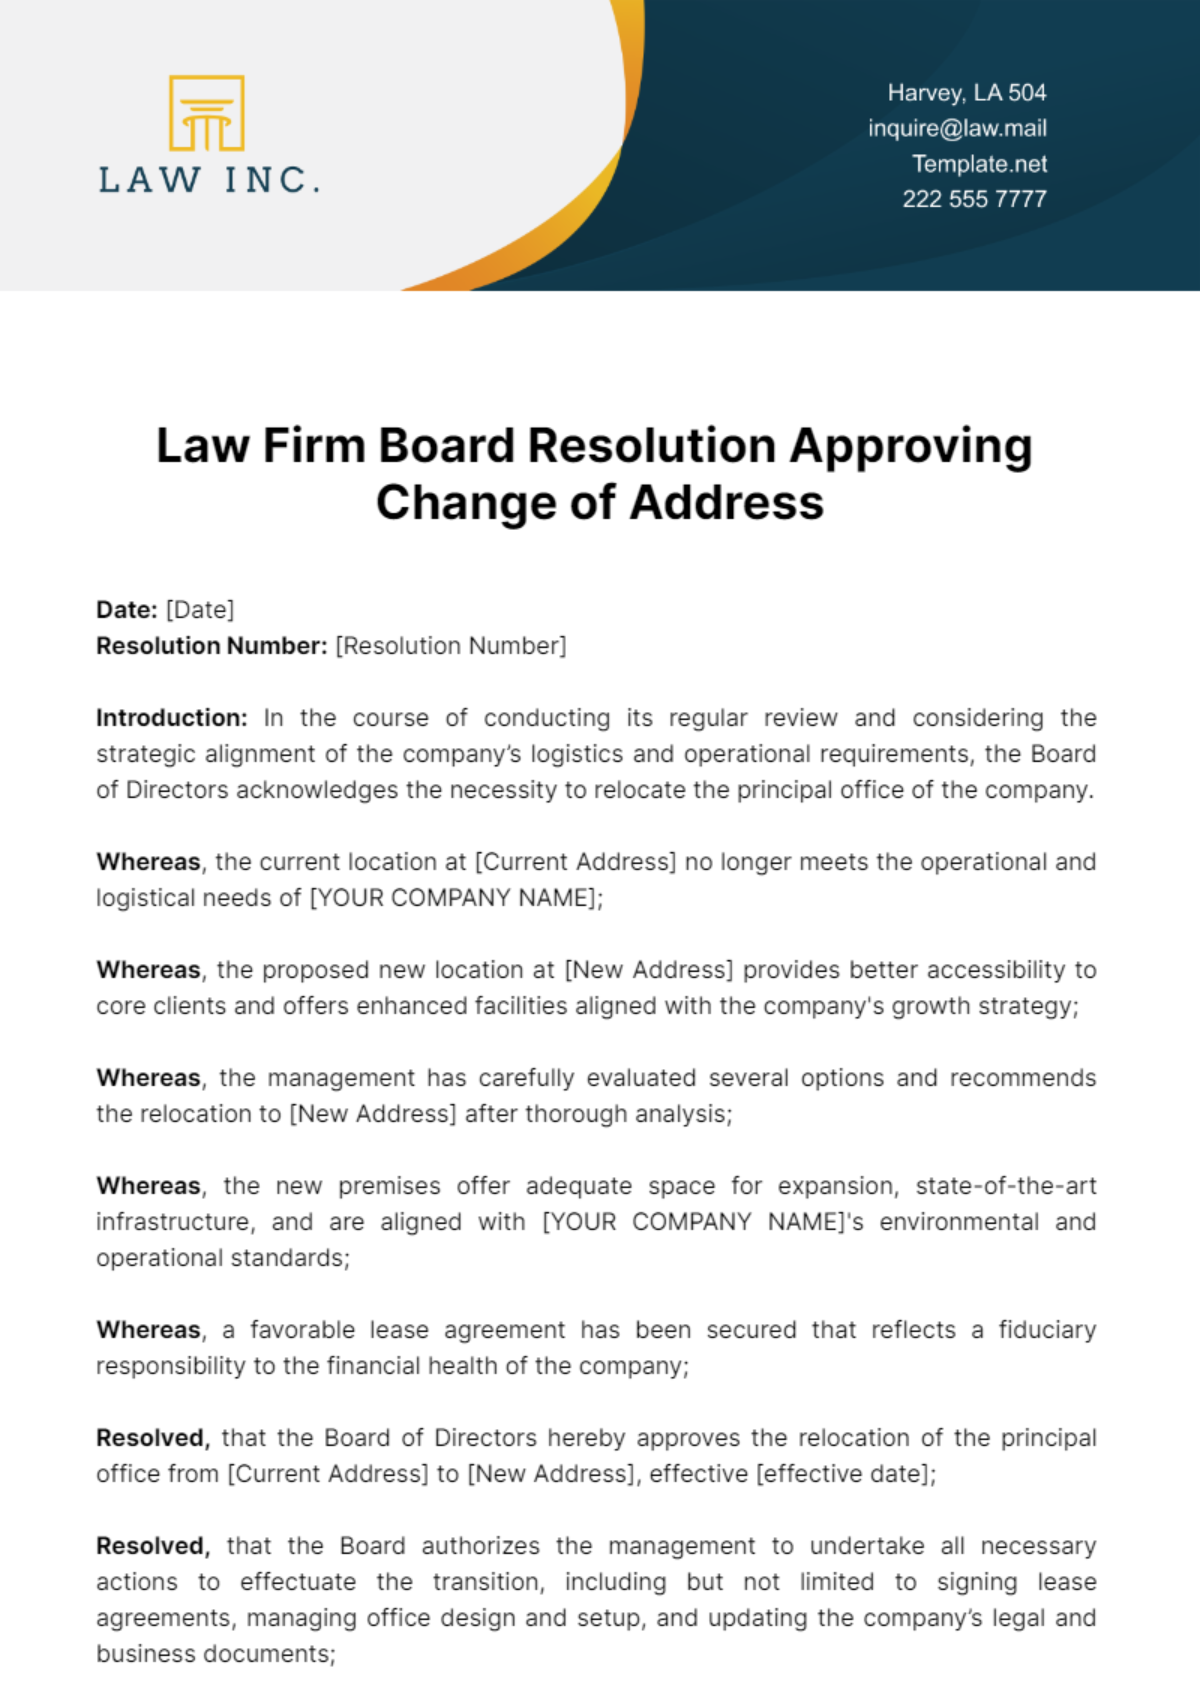 Free Law Firm Board Resolution Approving Change of Address Template